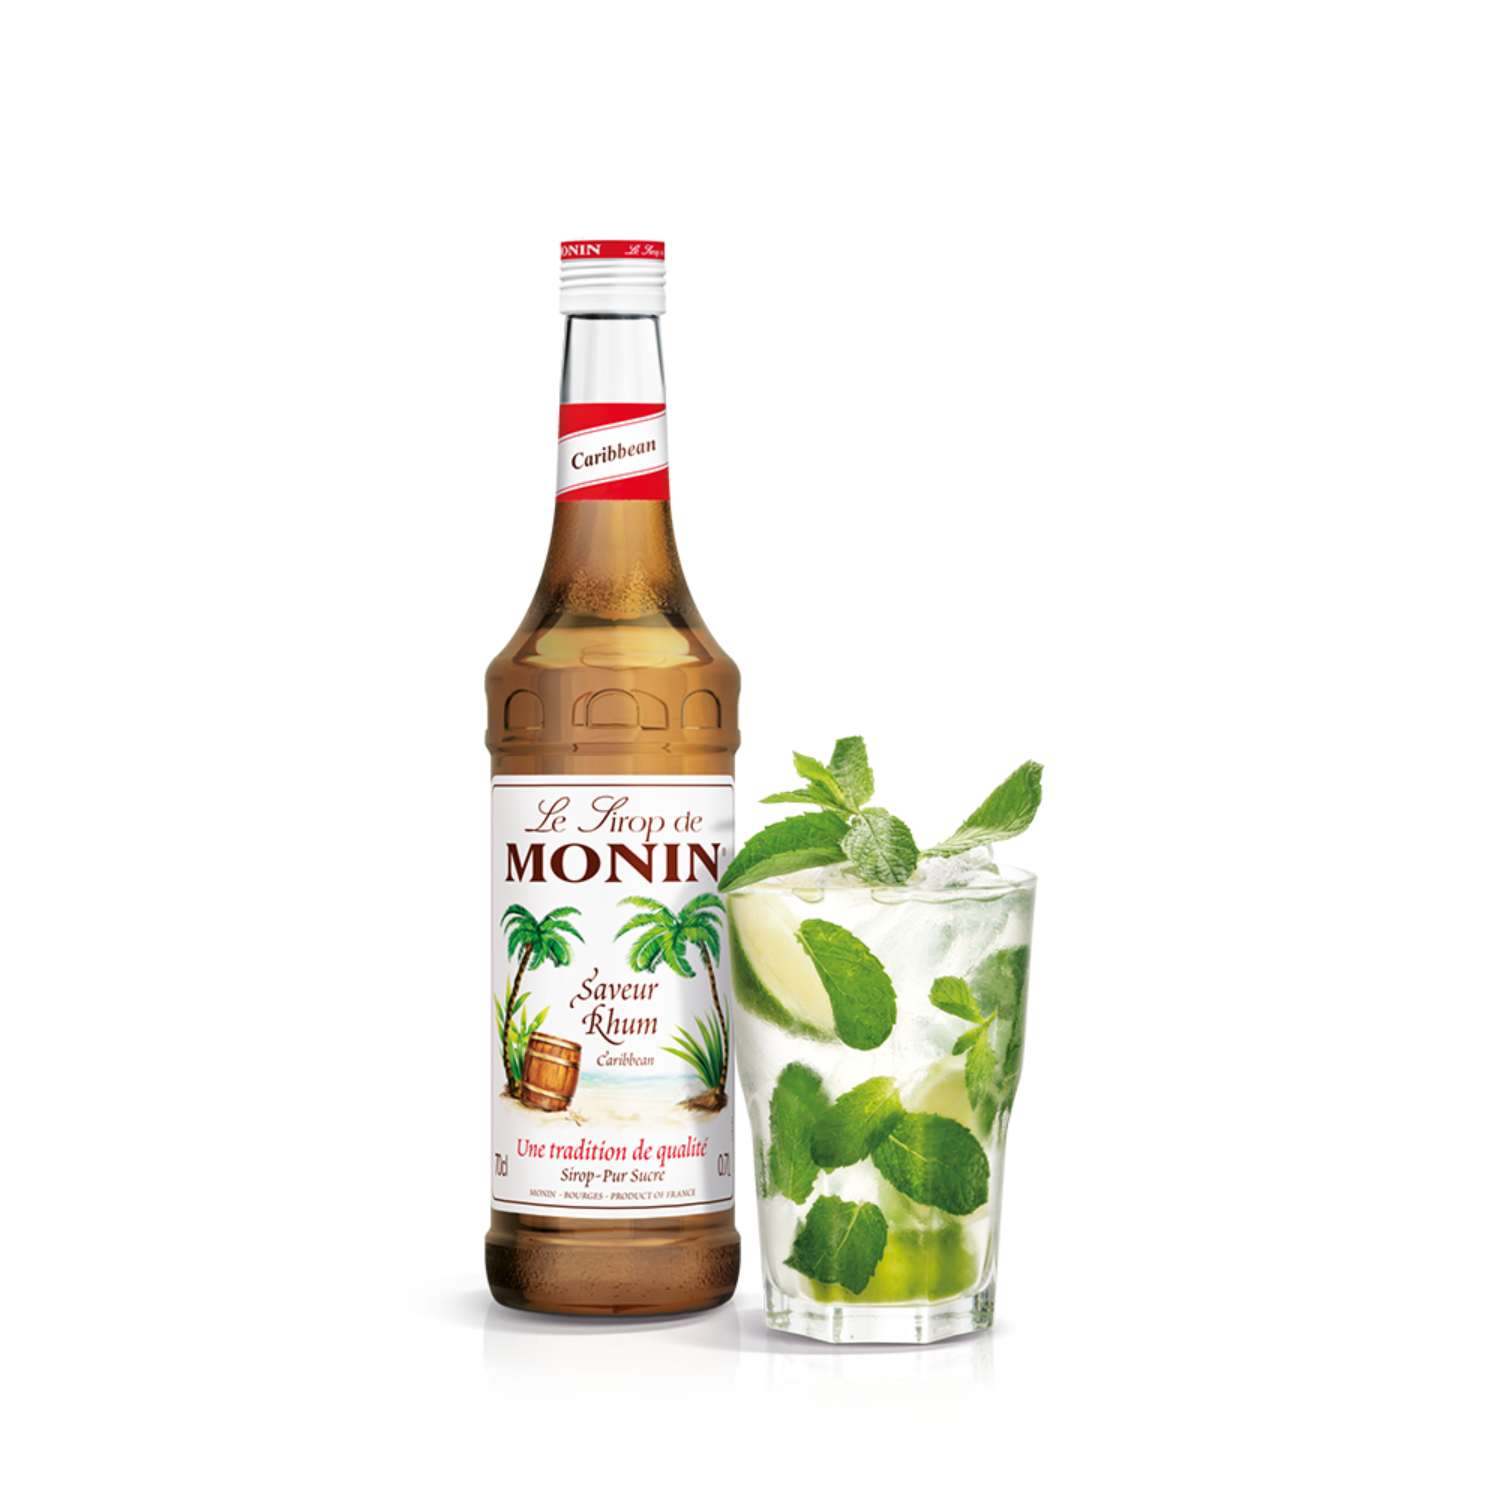 monin-caribbean-syrup-bottle-and-drink